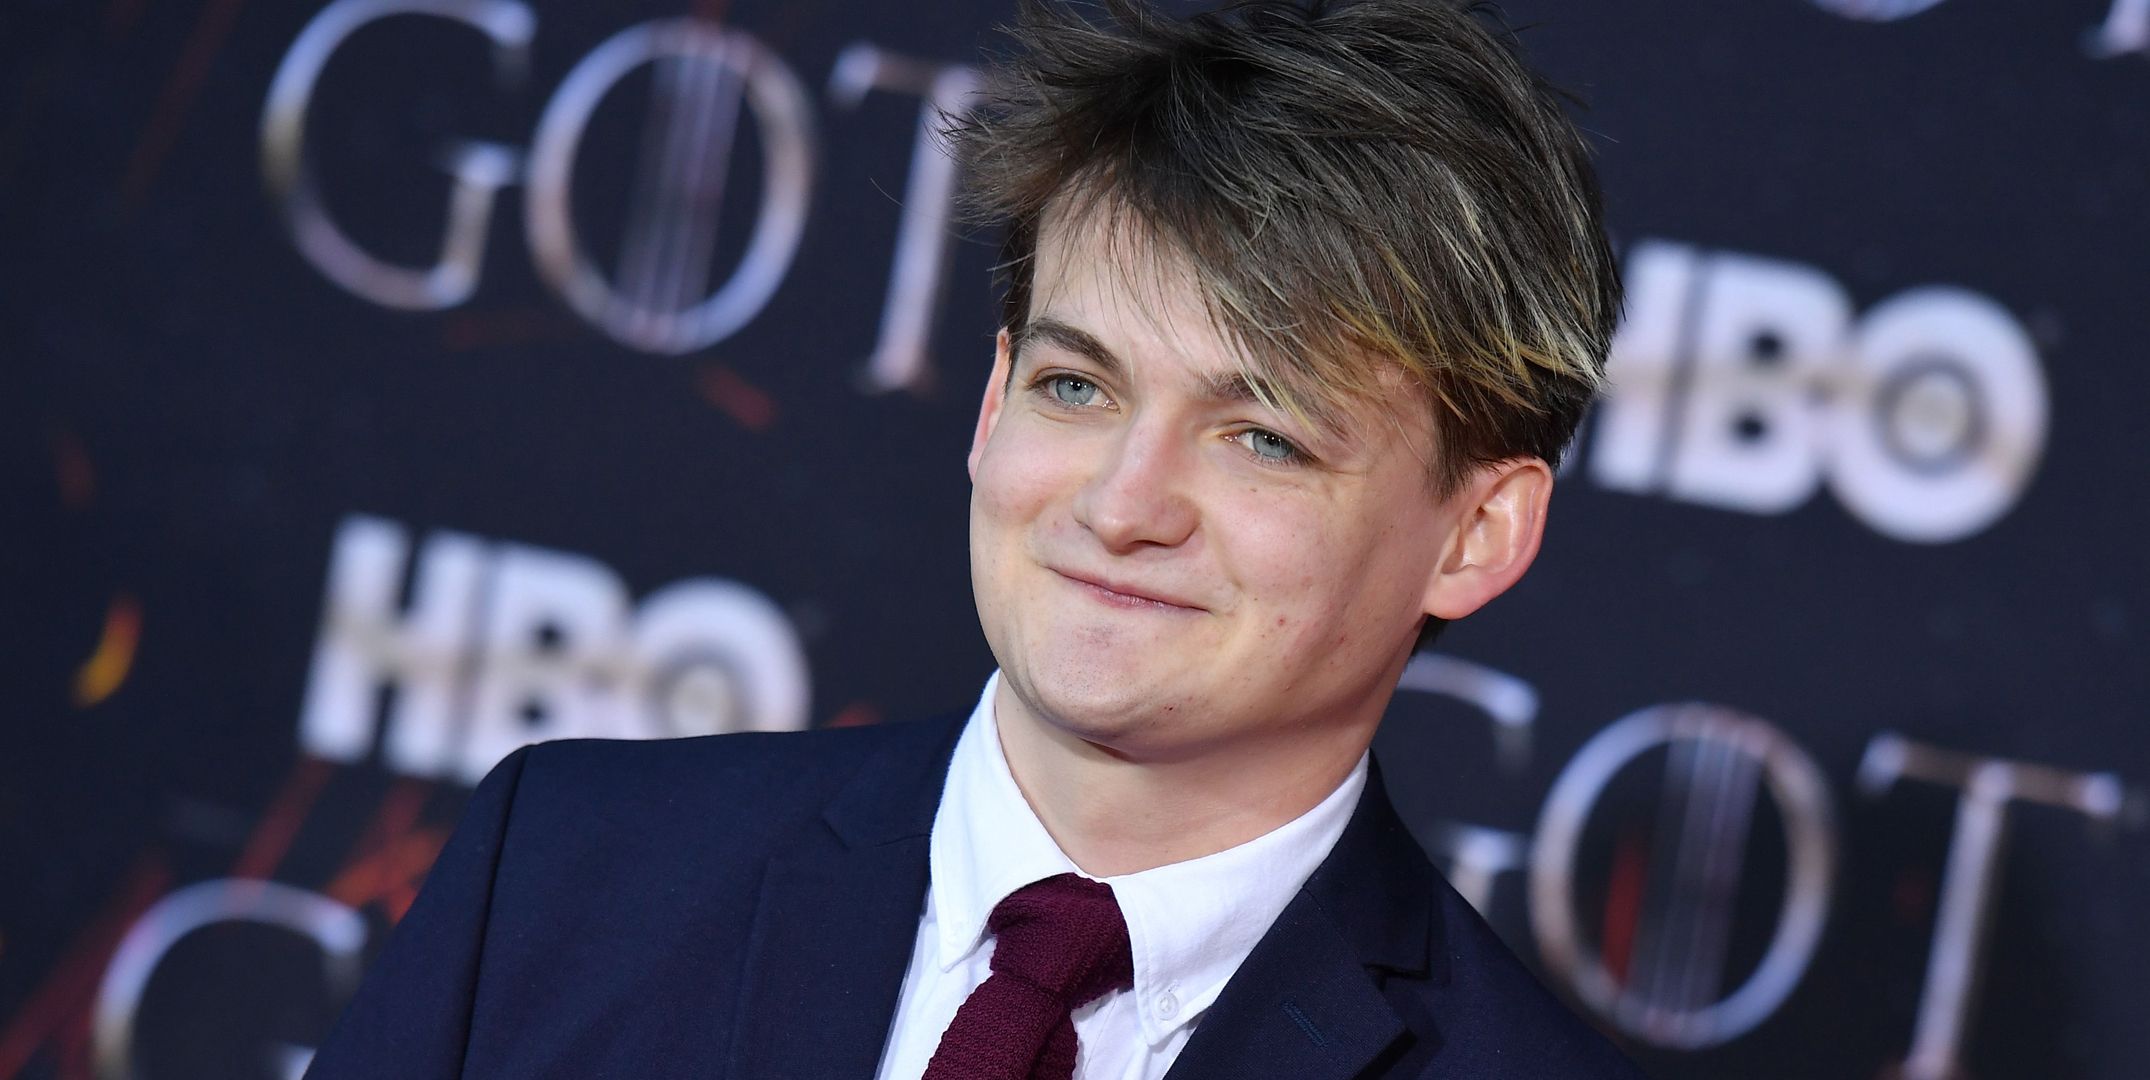 Sex Education Who does Jack Gleeson play in the new series?